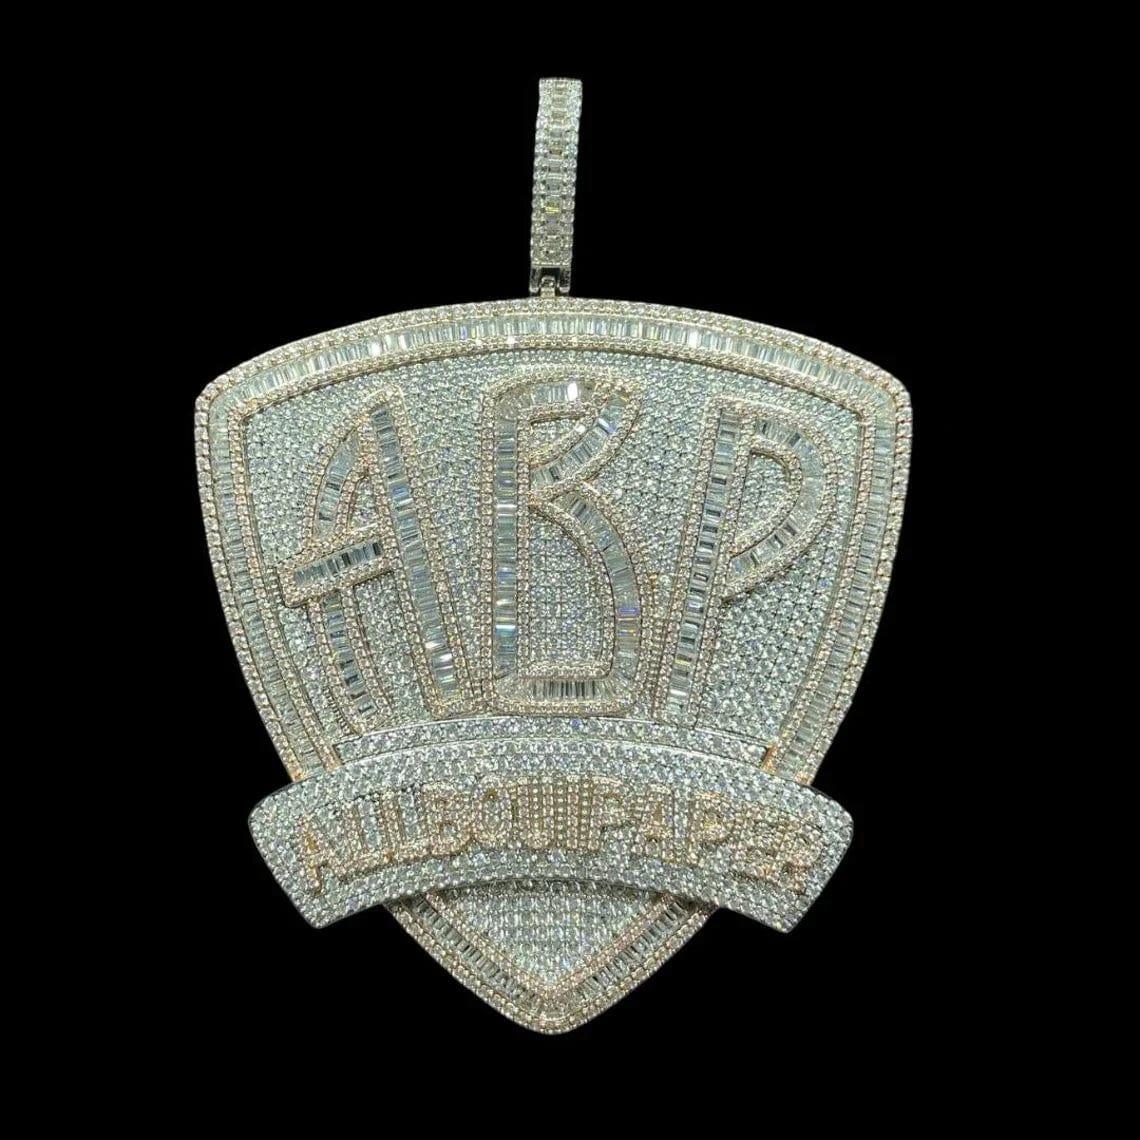 All Bout Paper BIG Luxury Baguette & Round Moissanite Diamond ABP Iced Out Pendant - JBR Jeweler